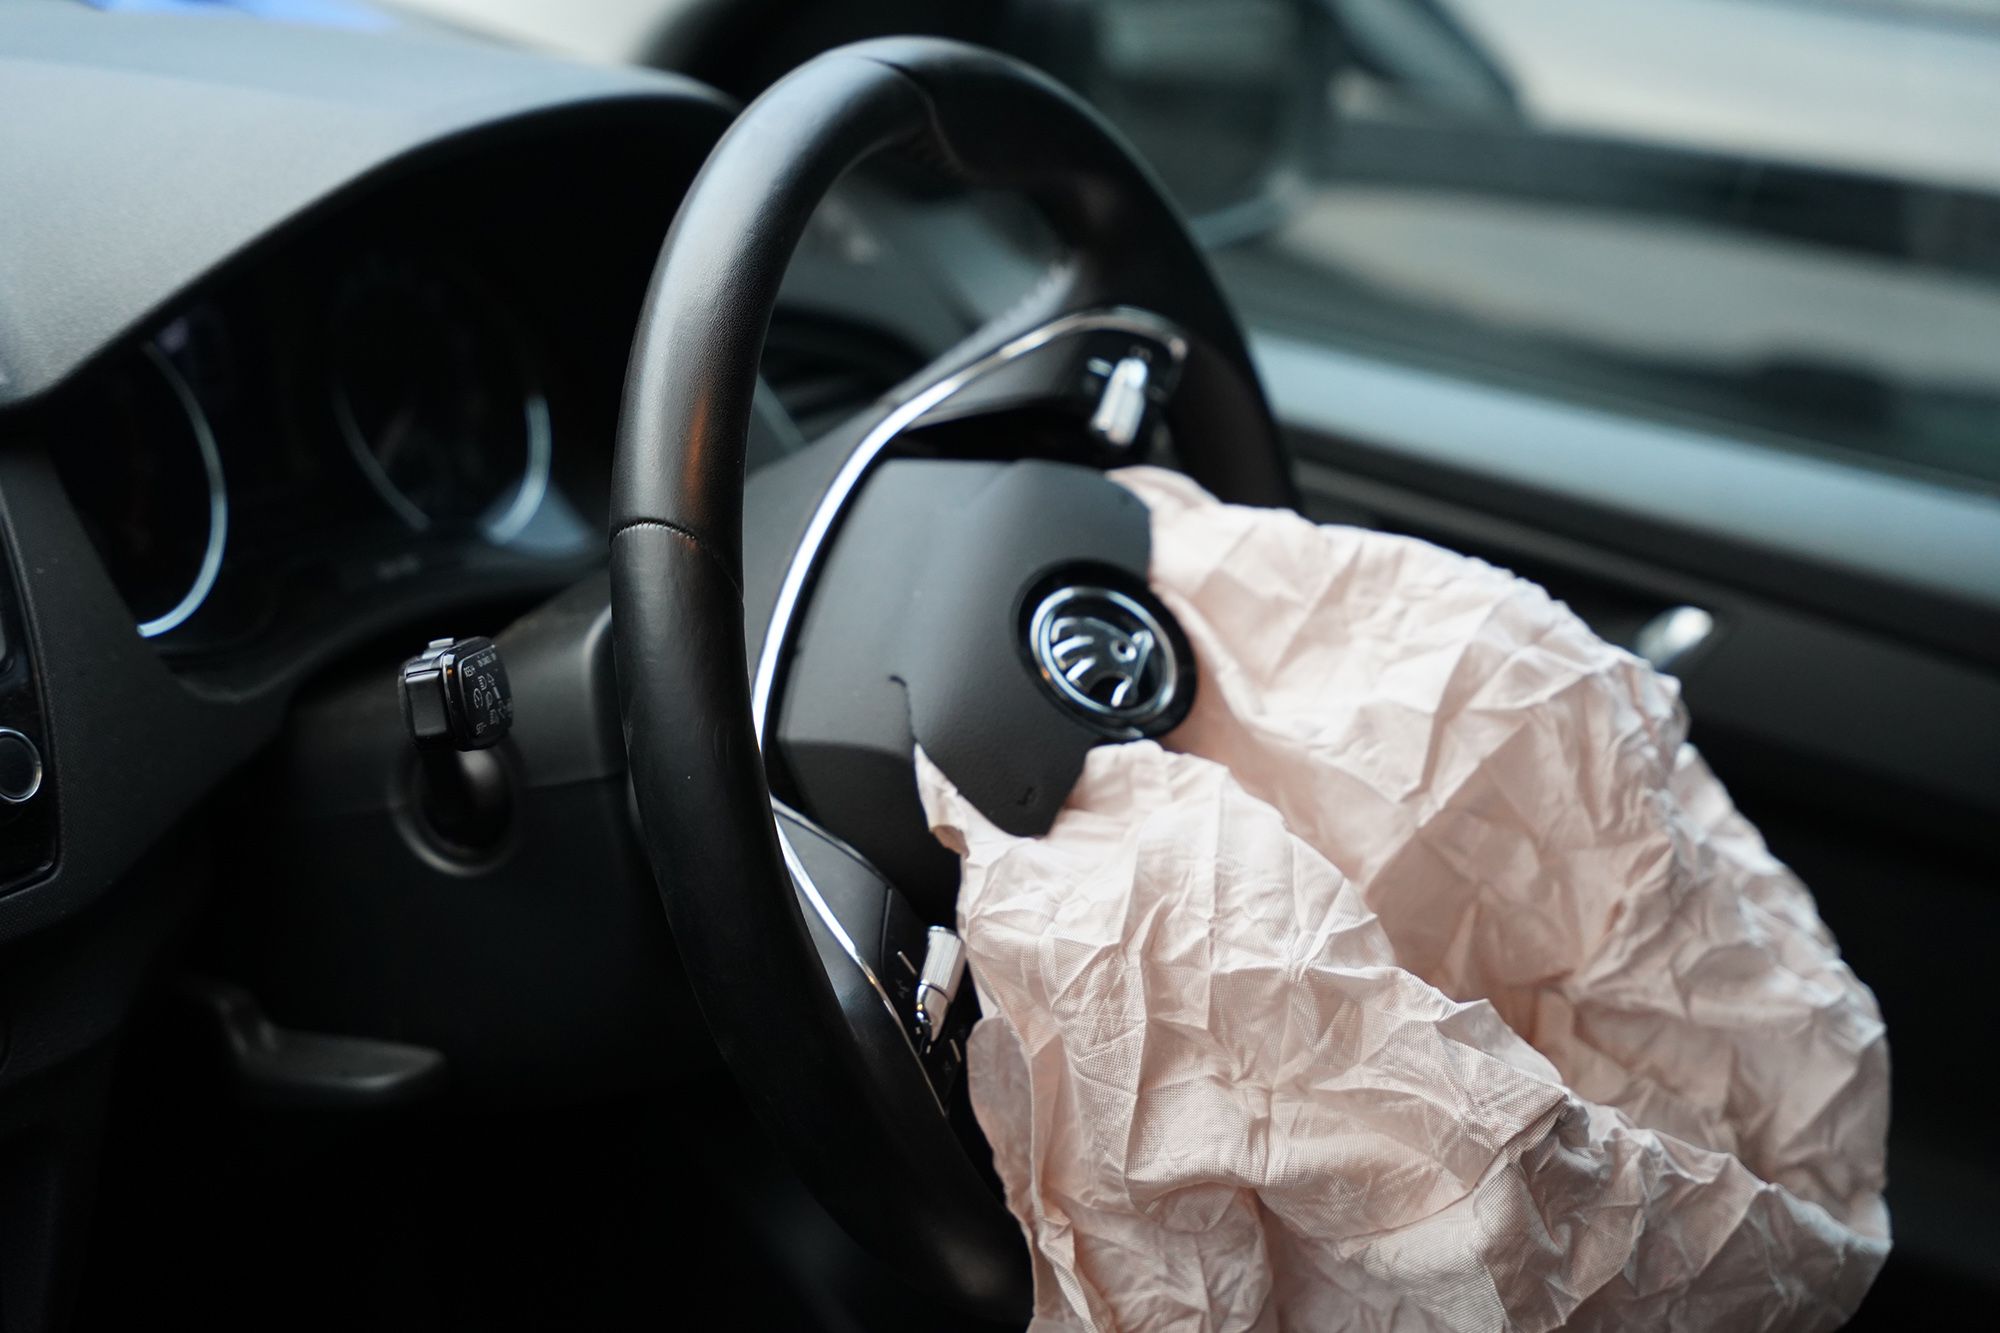 Skoda airbag after a car accident